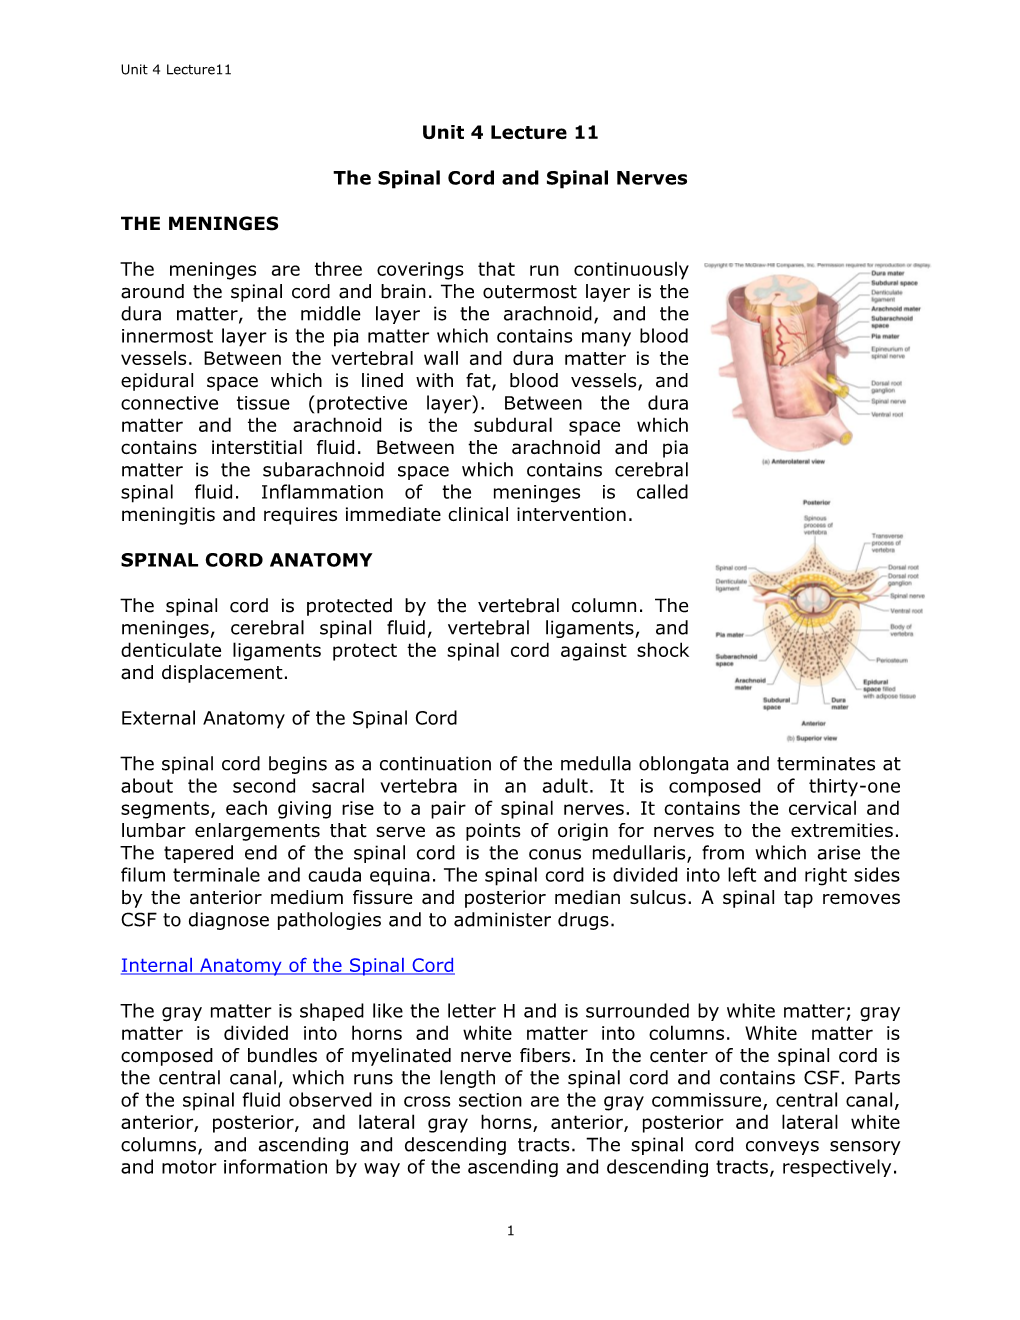 Unit 4 Lecture 11 the Spinal Cord and Spinal Nerves the MENINGES